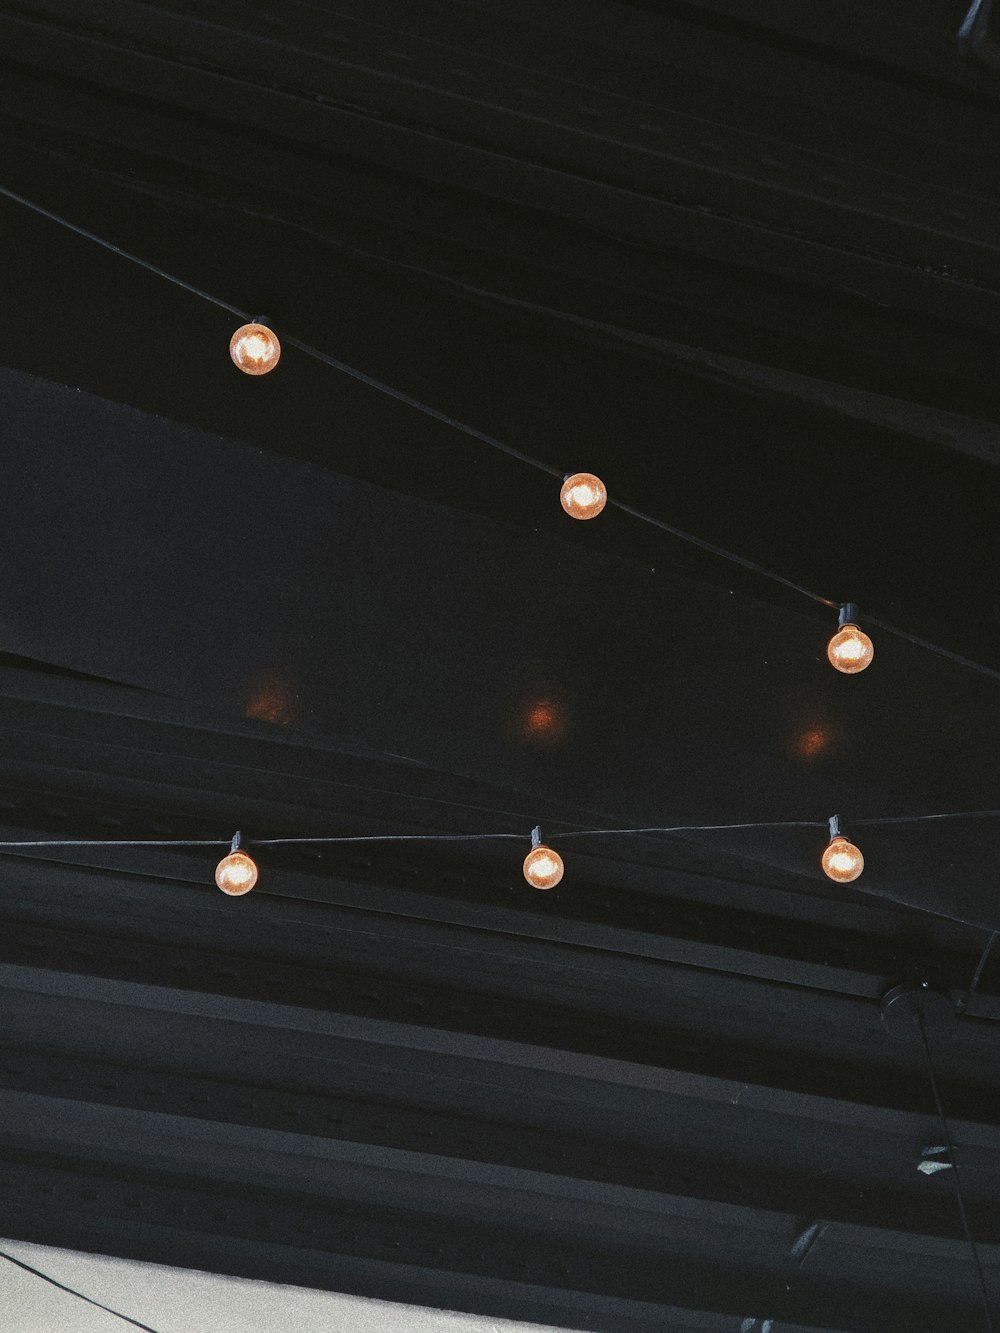 lights from a string